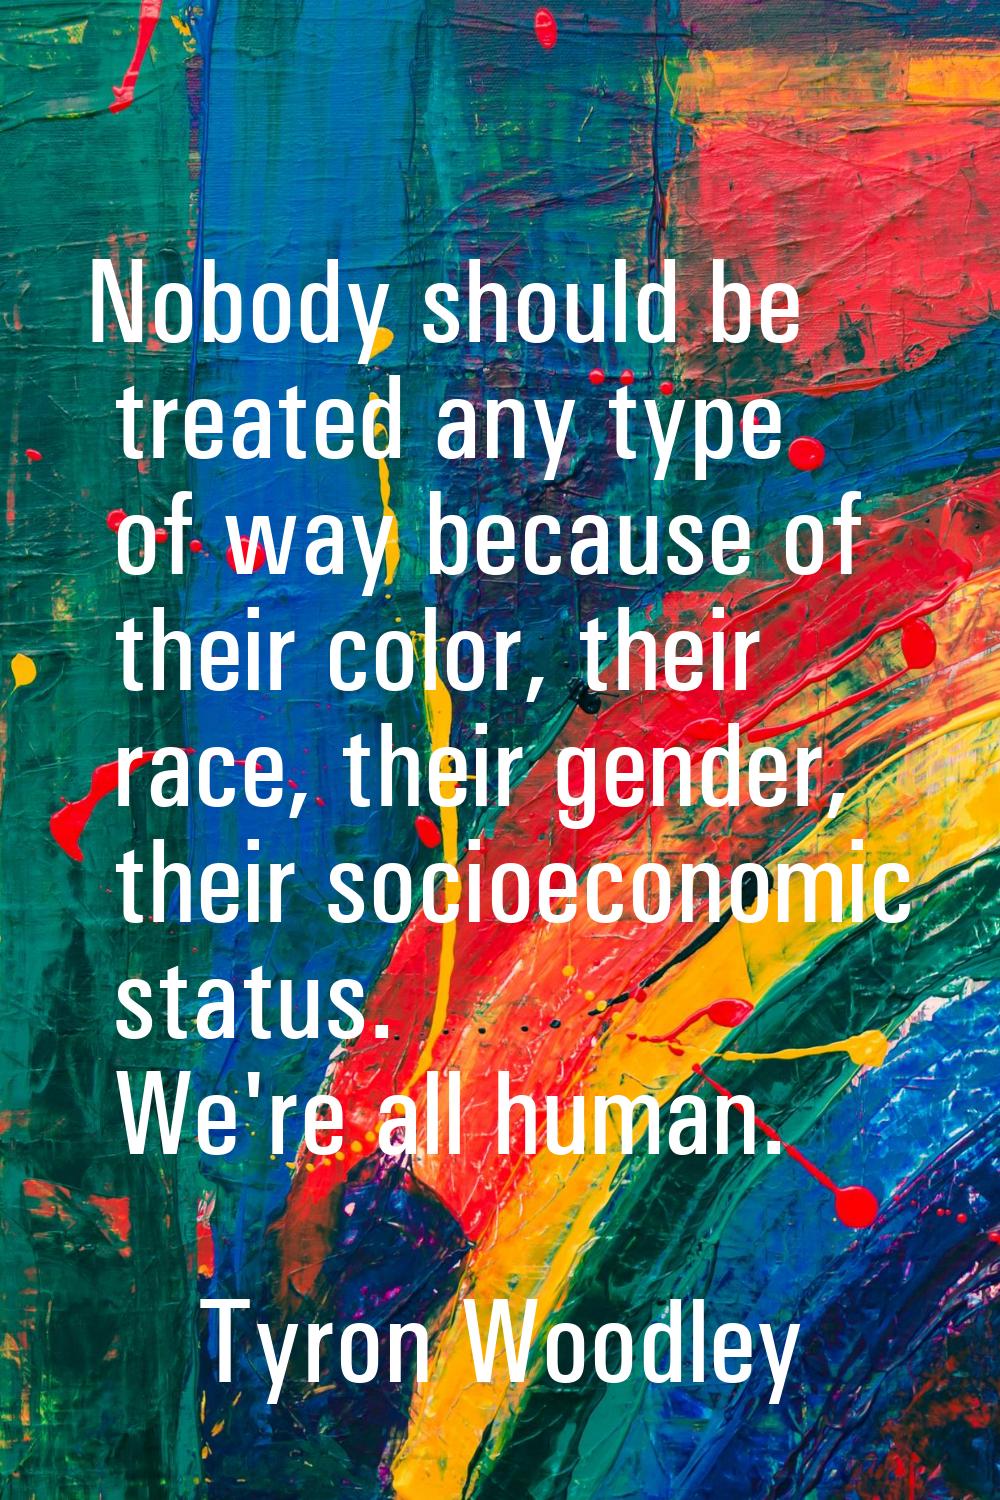 Nobody should be treated any type of way because of their color, their race, their gender, their so